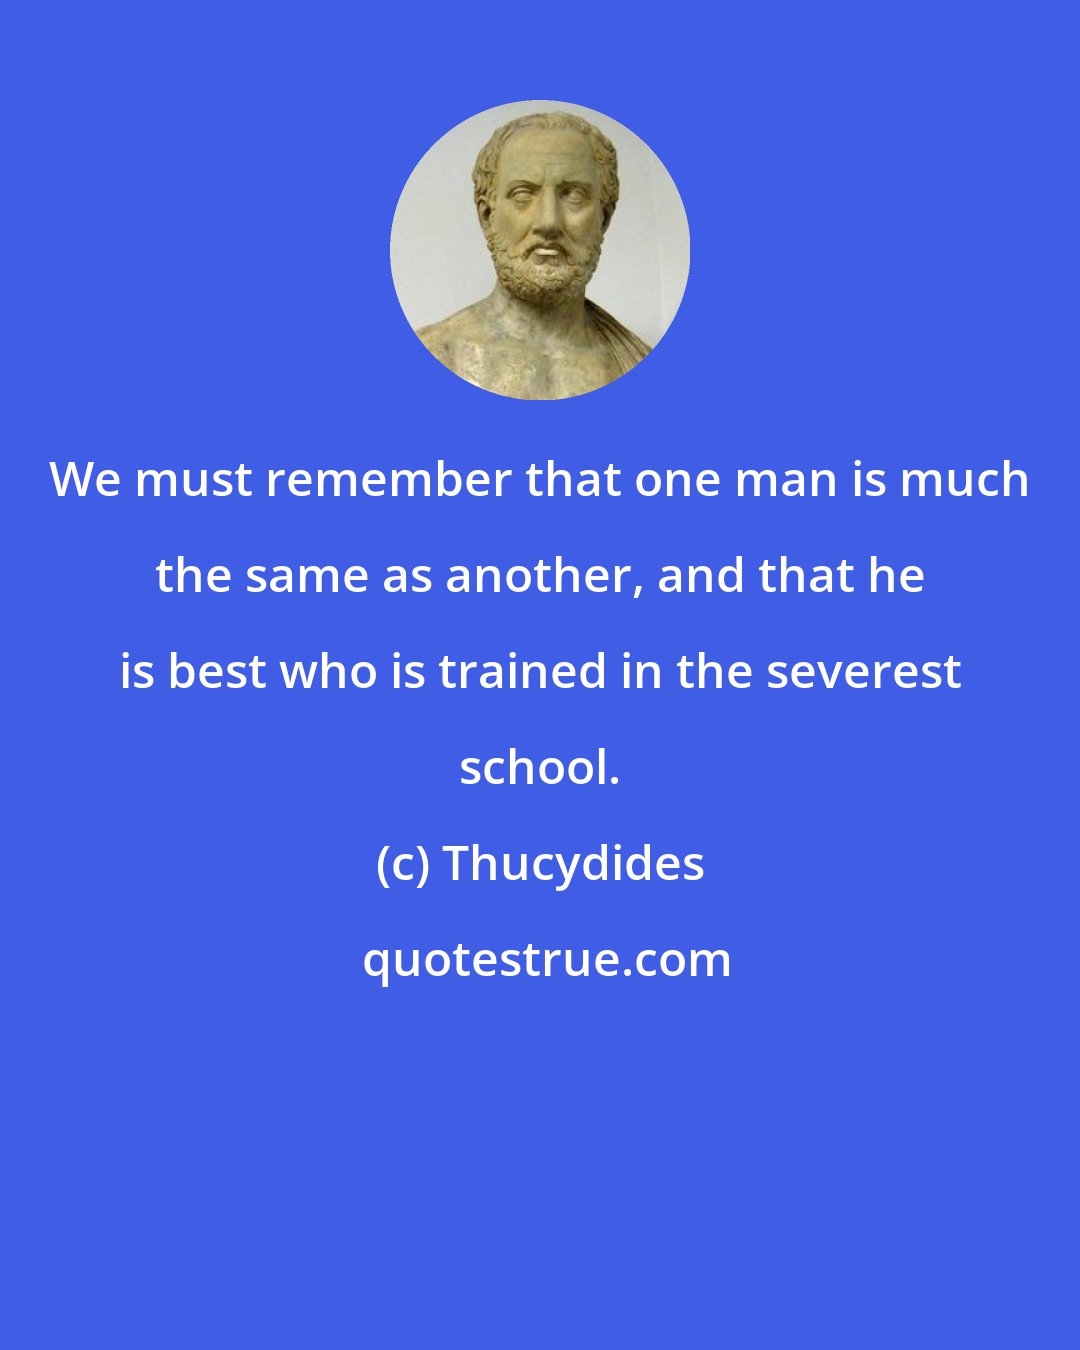 Thucydides: We must remember that one man is much the same as another, and that he is best who is trained in the severest school.